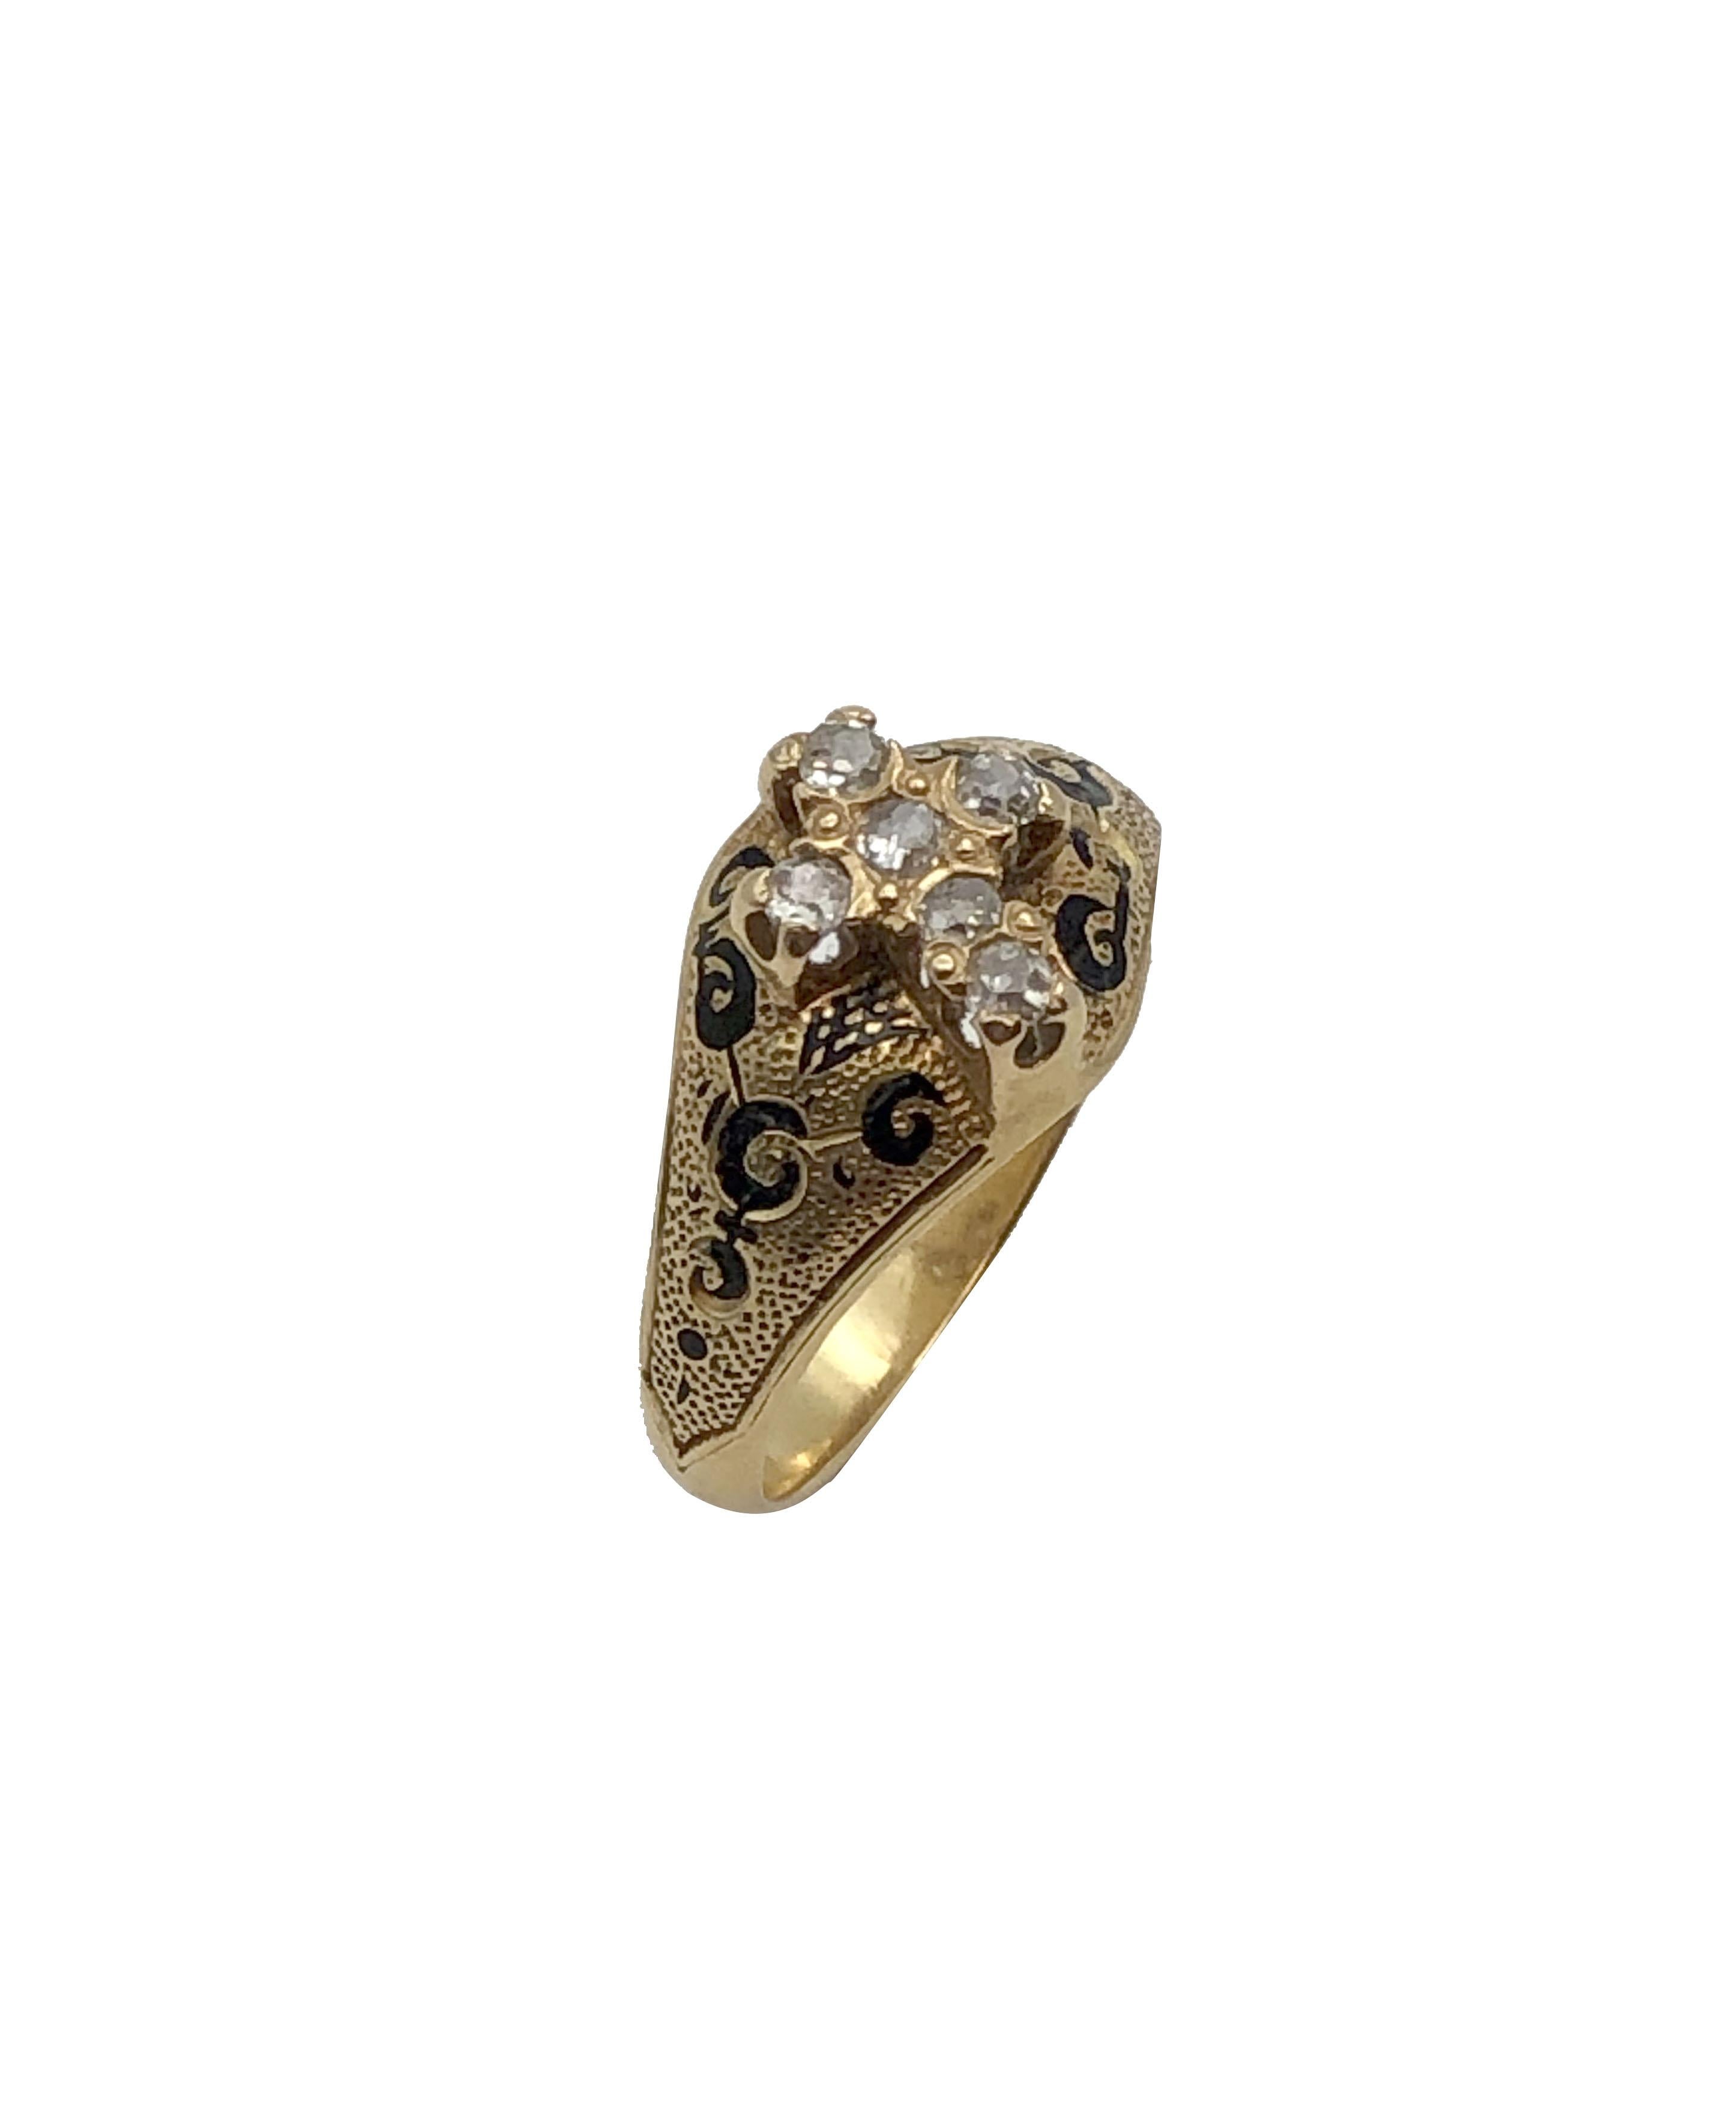 1850s Early Victorian Gold Enamel and Diamonds Cross Form Ring In Excellent Condition For Sale In Chicago, IL